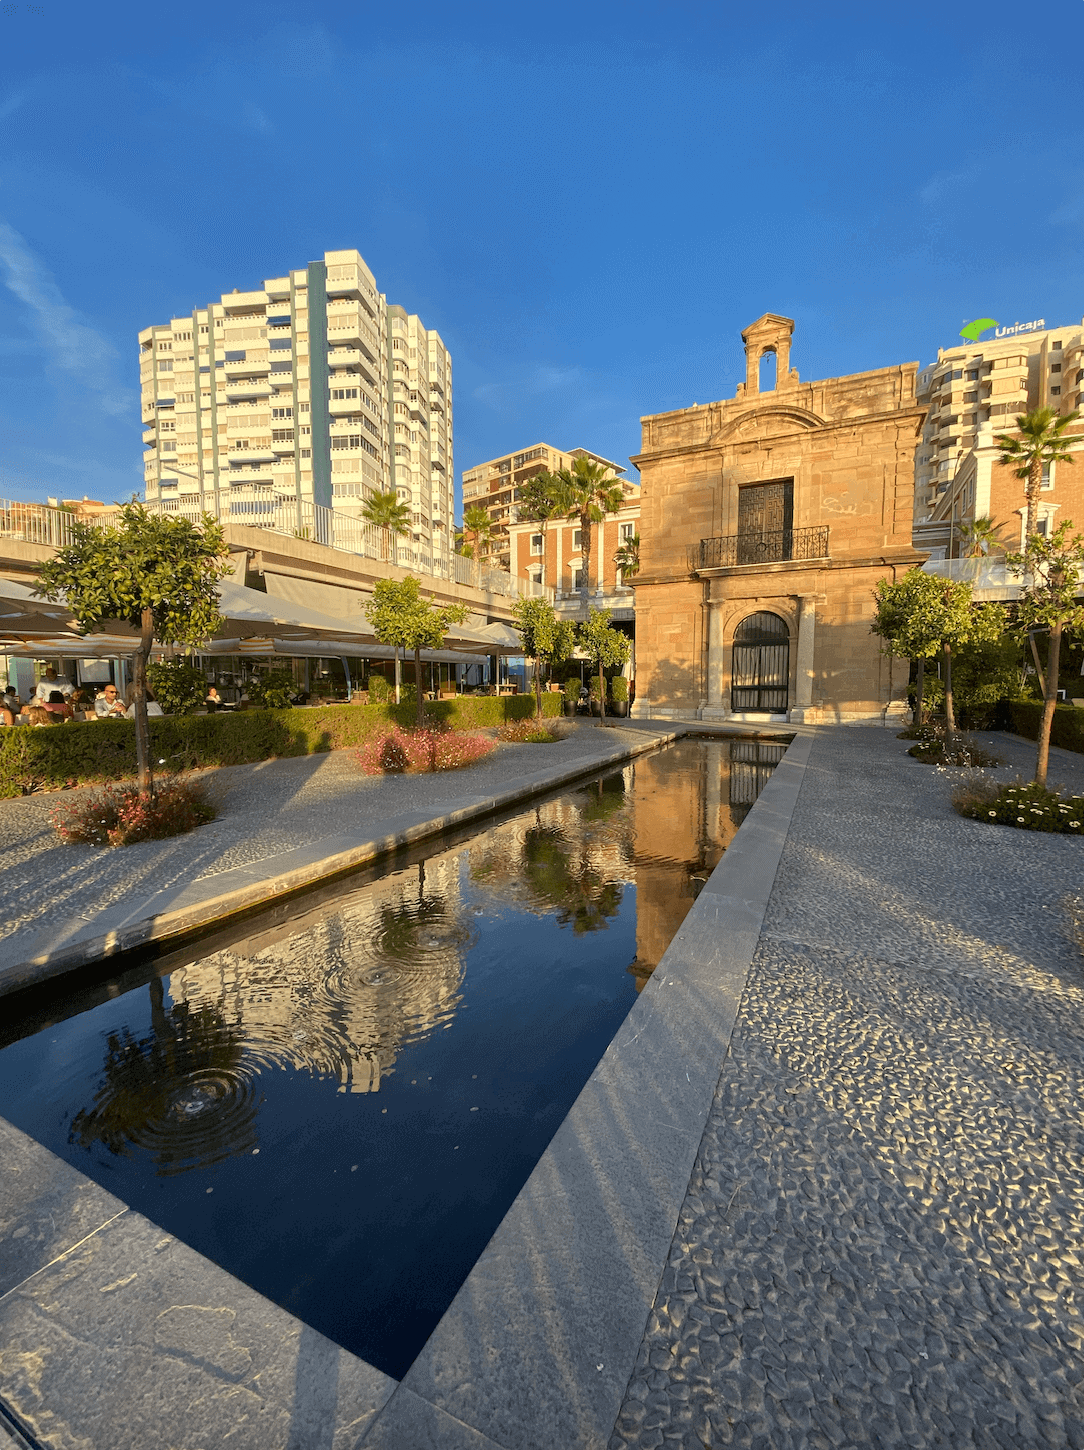 A rectangular pond with an old building and a new skyscraper in the background at sunset, in Malaga's Old Town.